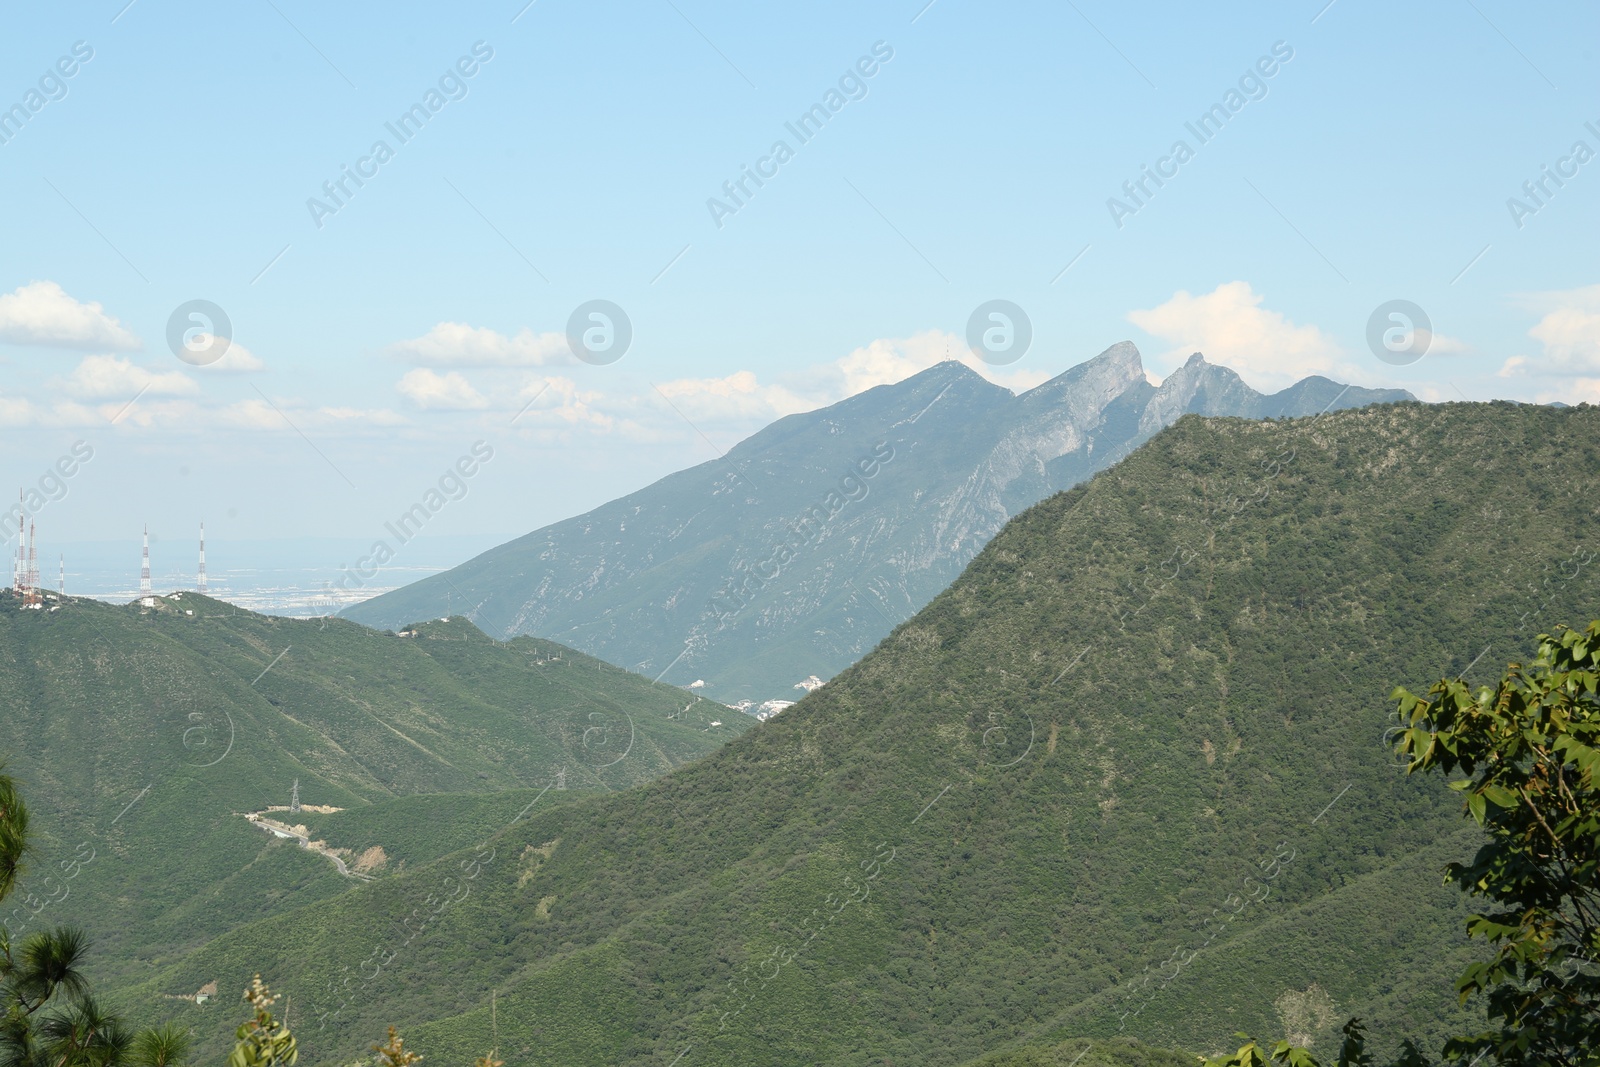 Photo of Picturesque view of mountains and trees under cloudy sky